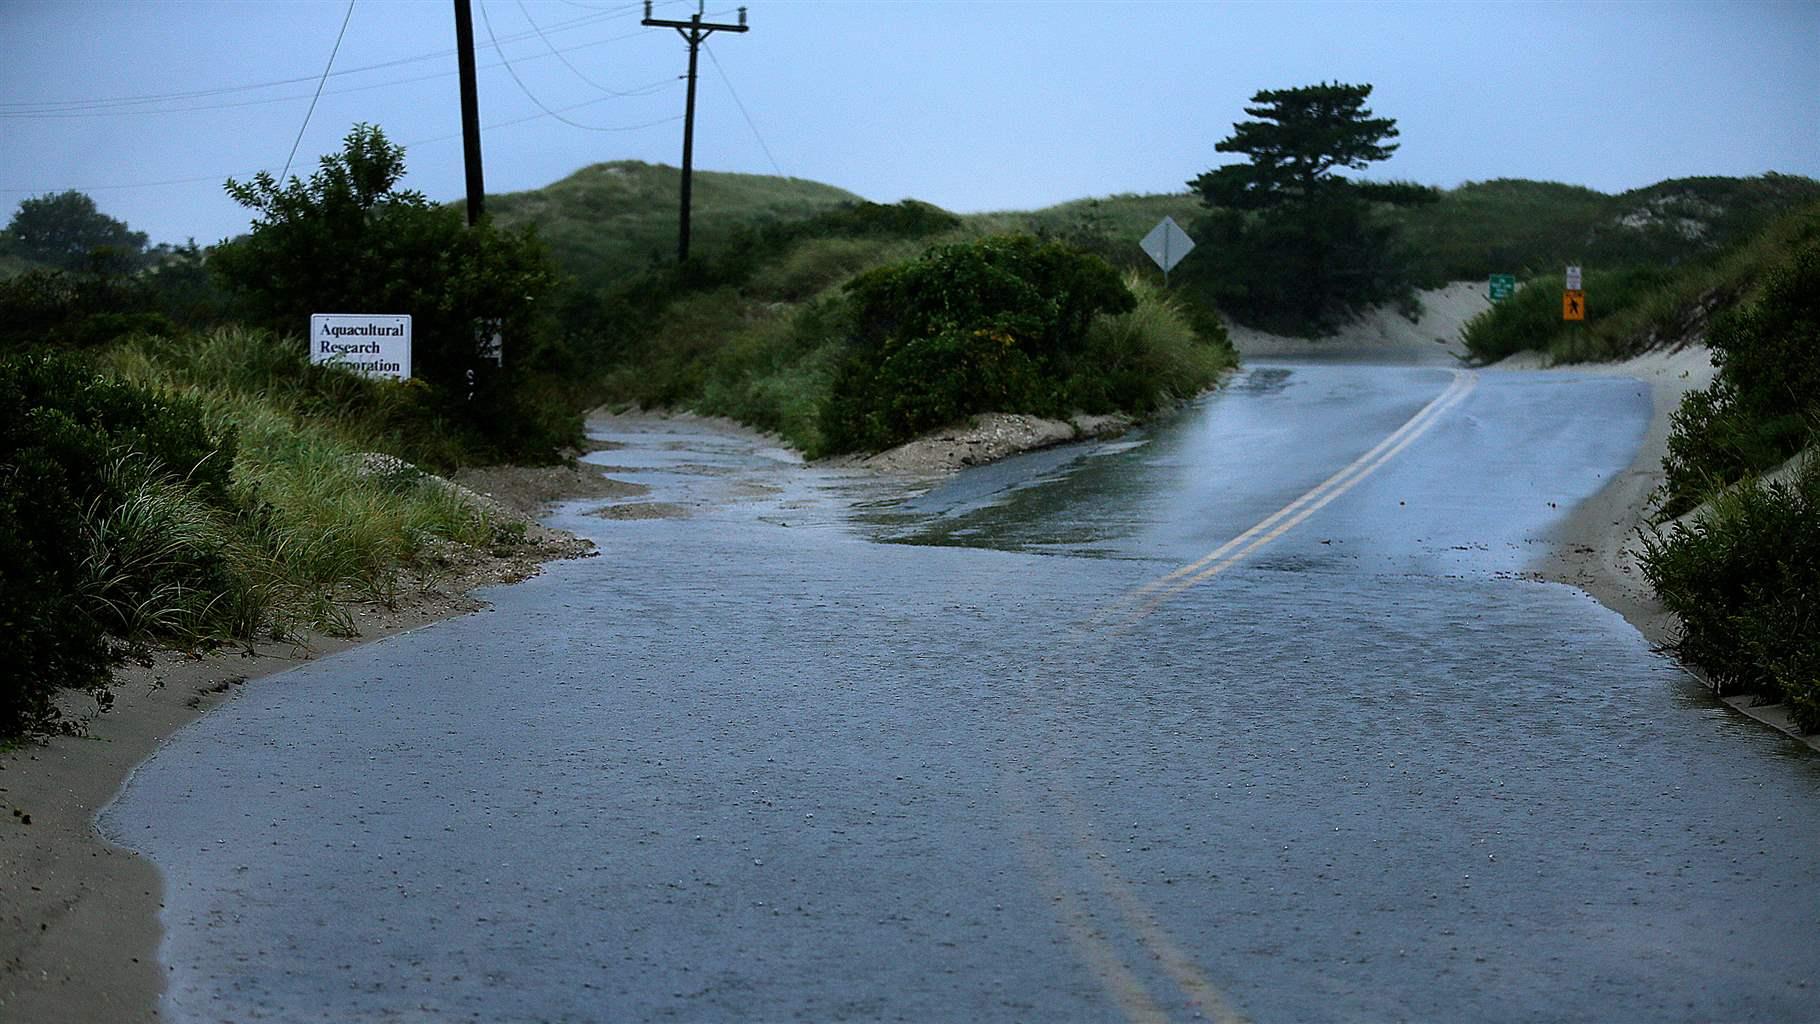 Hurricane Dorian gives a glancing blow to Cape Cod, as high tide in the early morning brings some flooding to Dr. Botello Road leading to Chapin Memorial Beach, right, and the road to the Aquaculture Research Corporation, left, in Dennis, MA on Sep. 7, 2019.